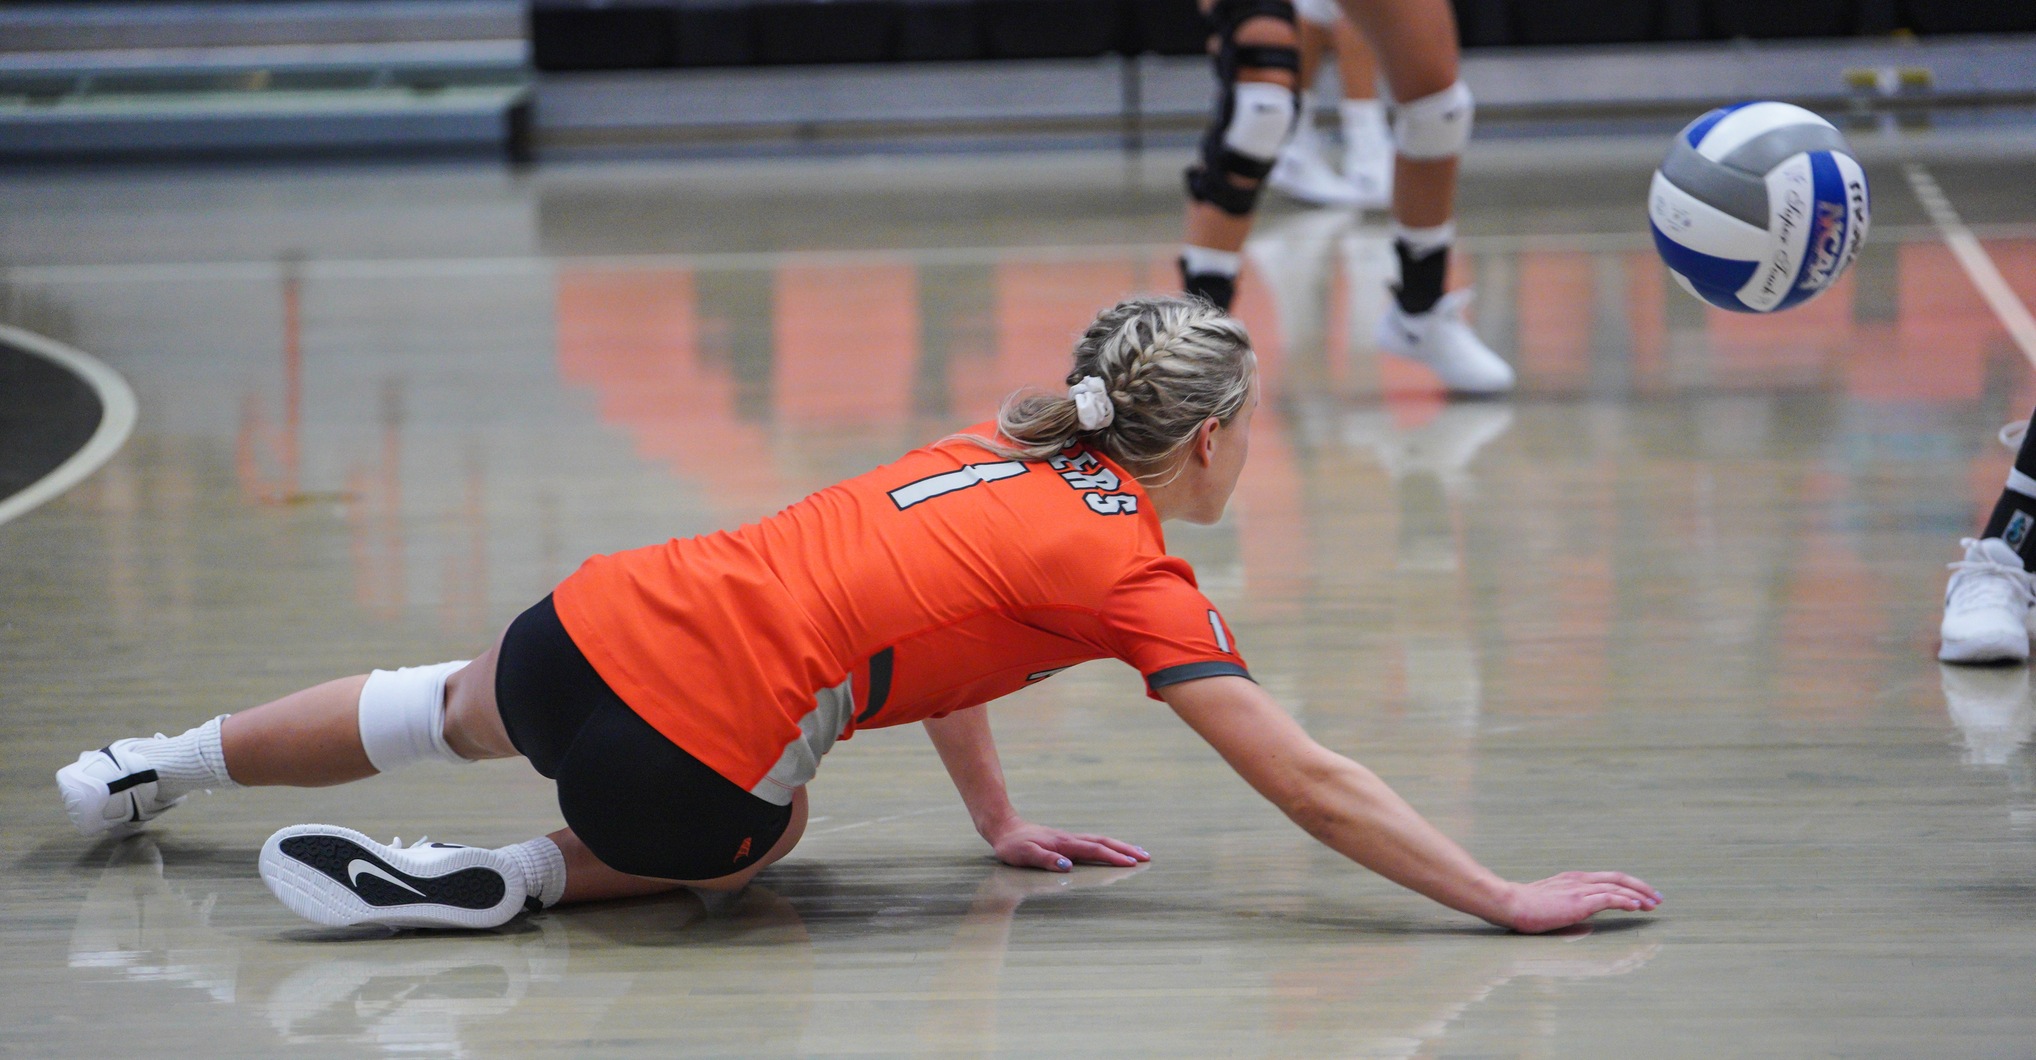 Findlay Loses to Tiffin in Three Sets